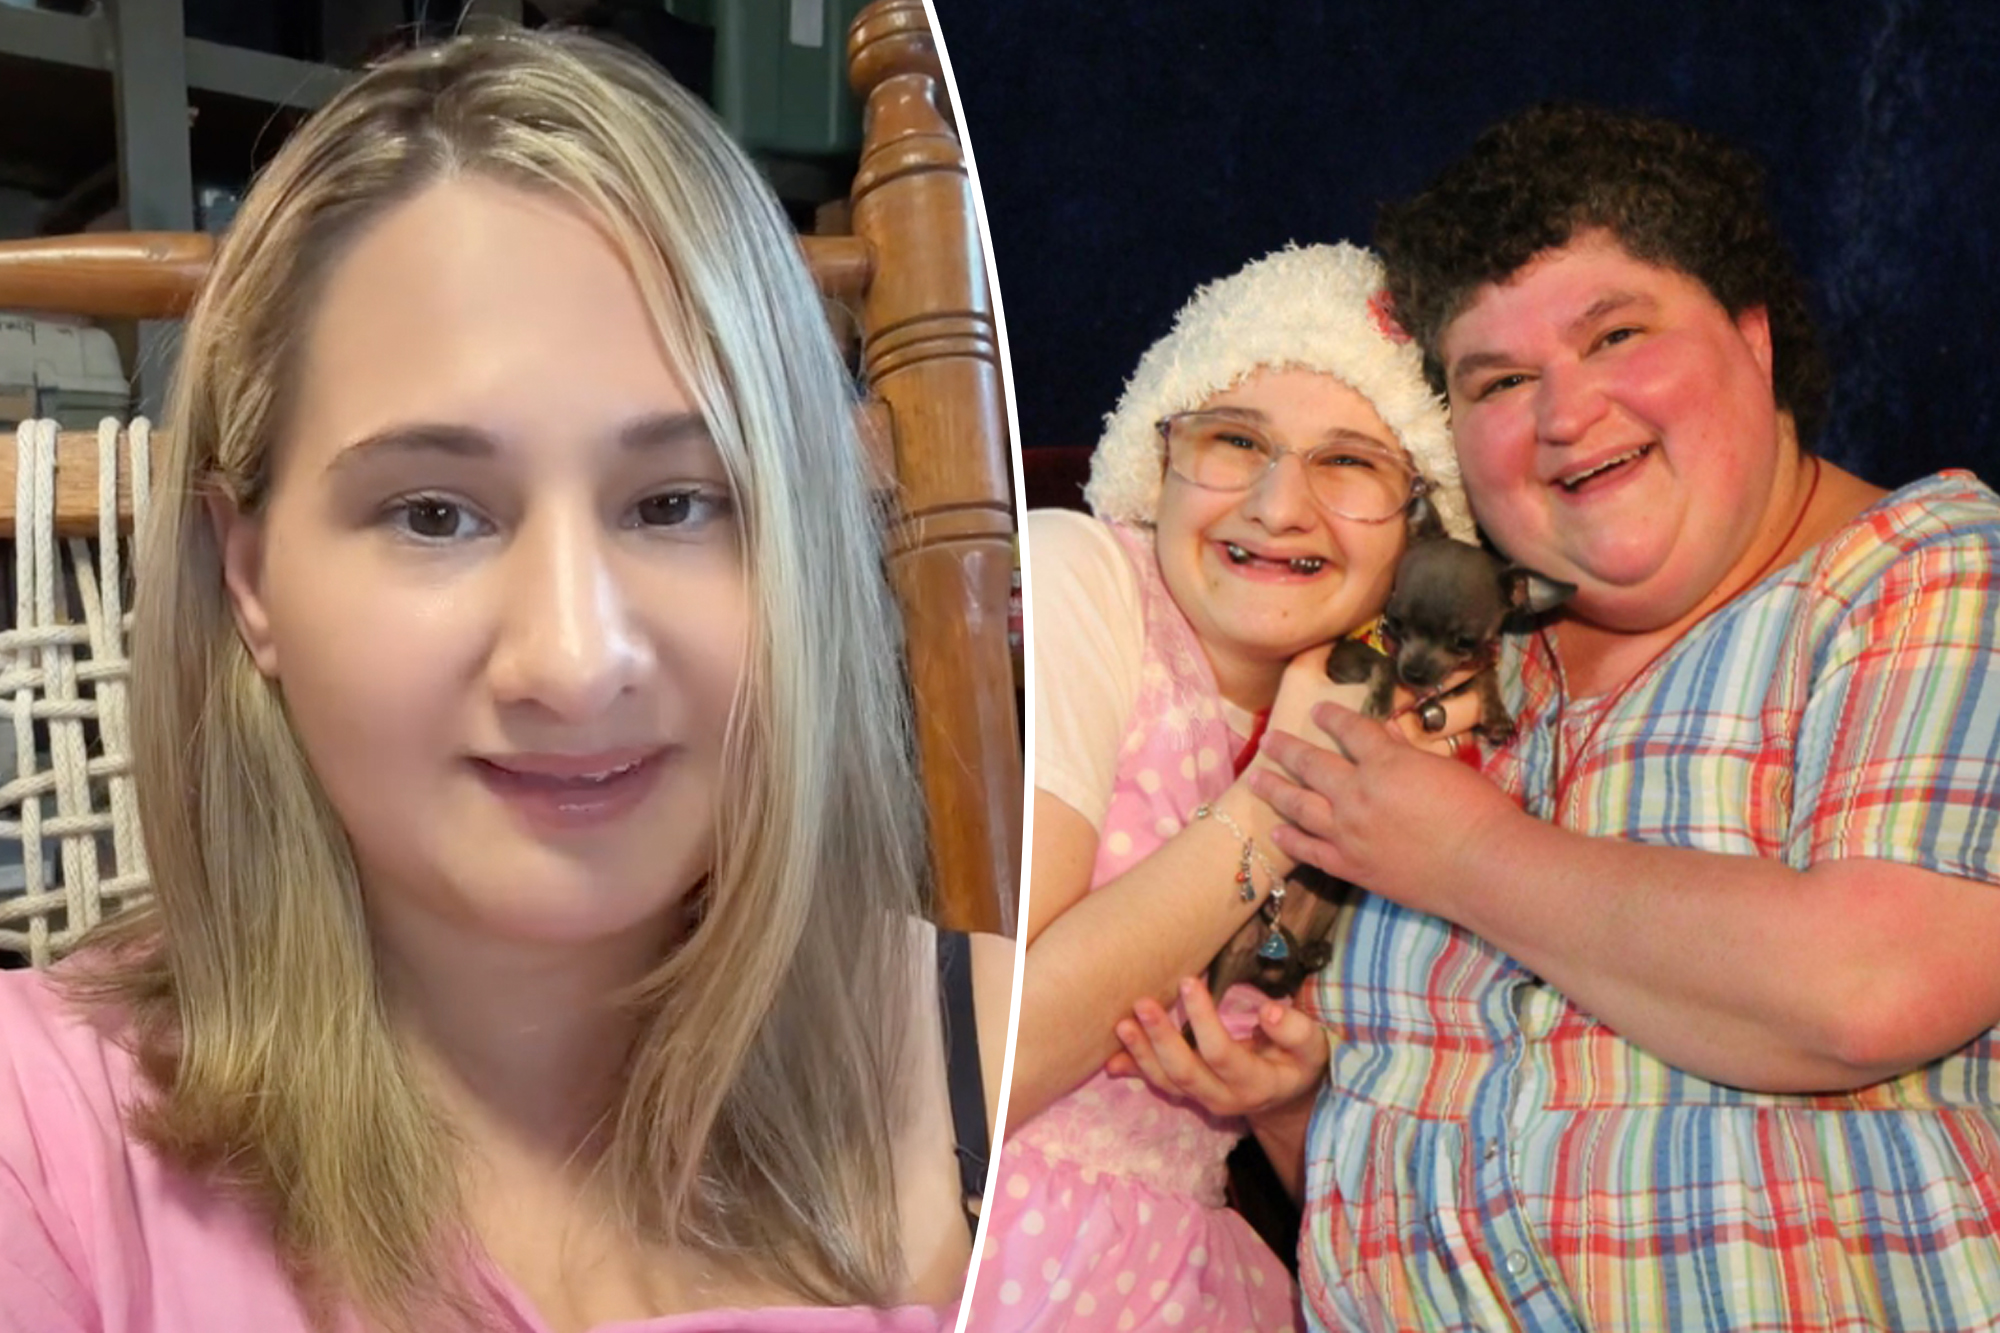 Gypsy Rose Blanchard reflects on ‘the good times’ with late mom in emotional Mother’s Day video